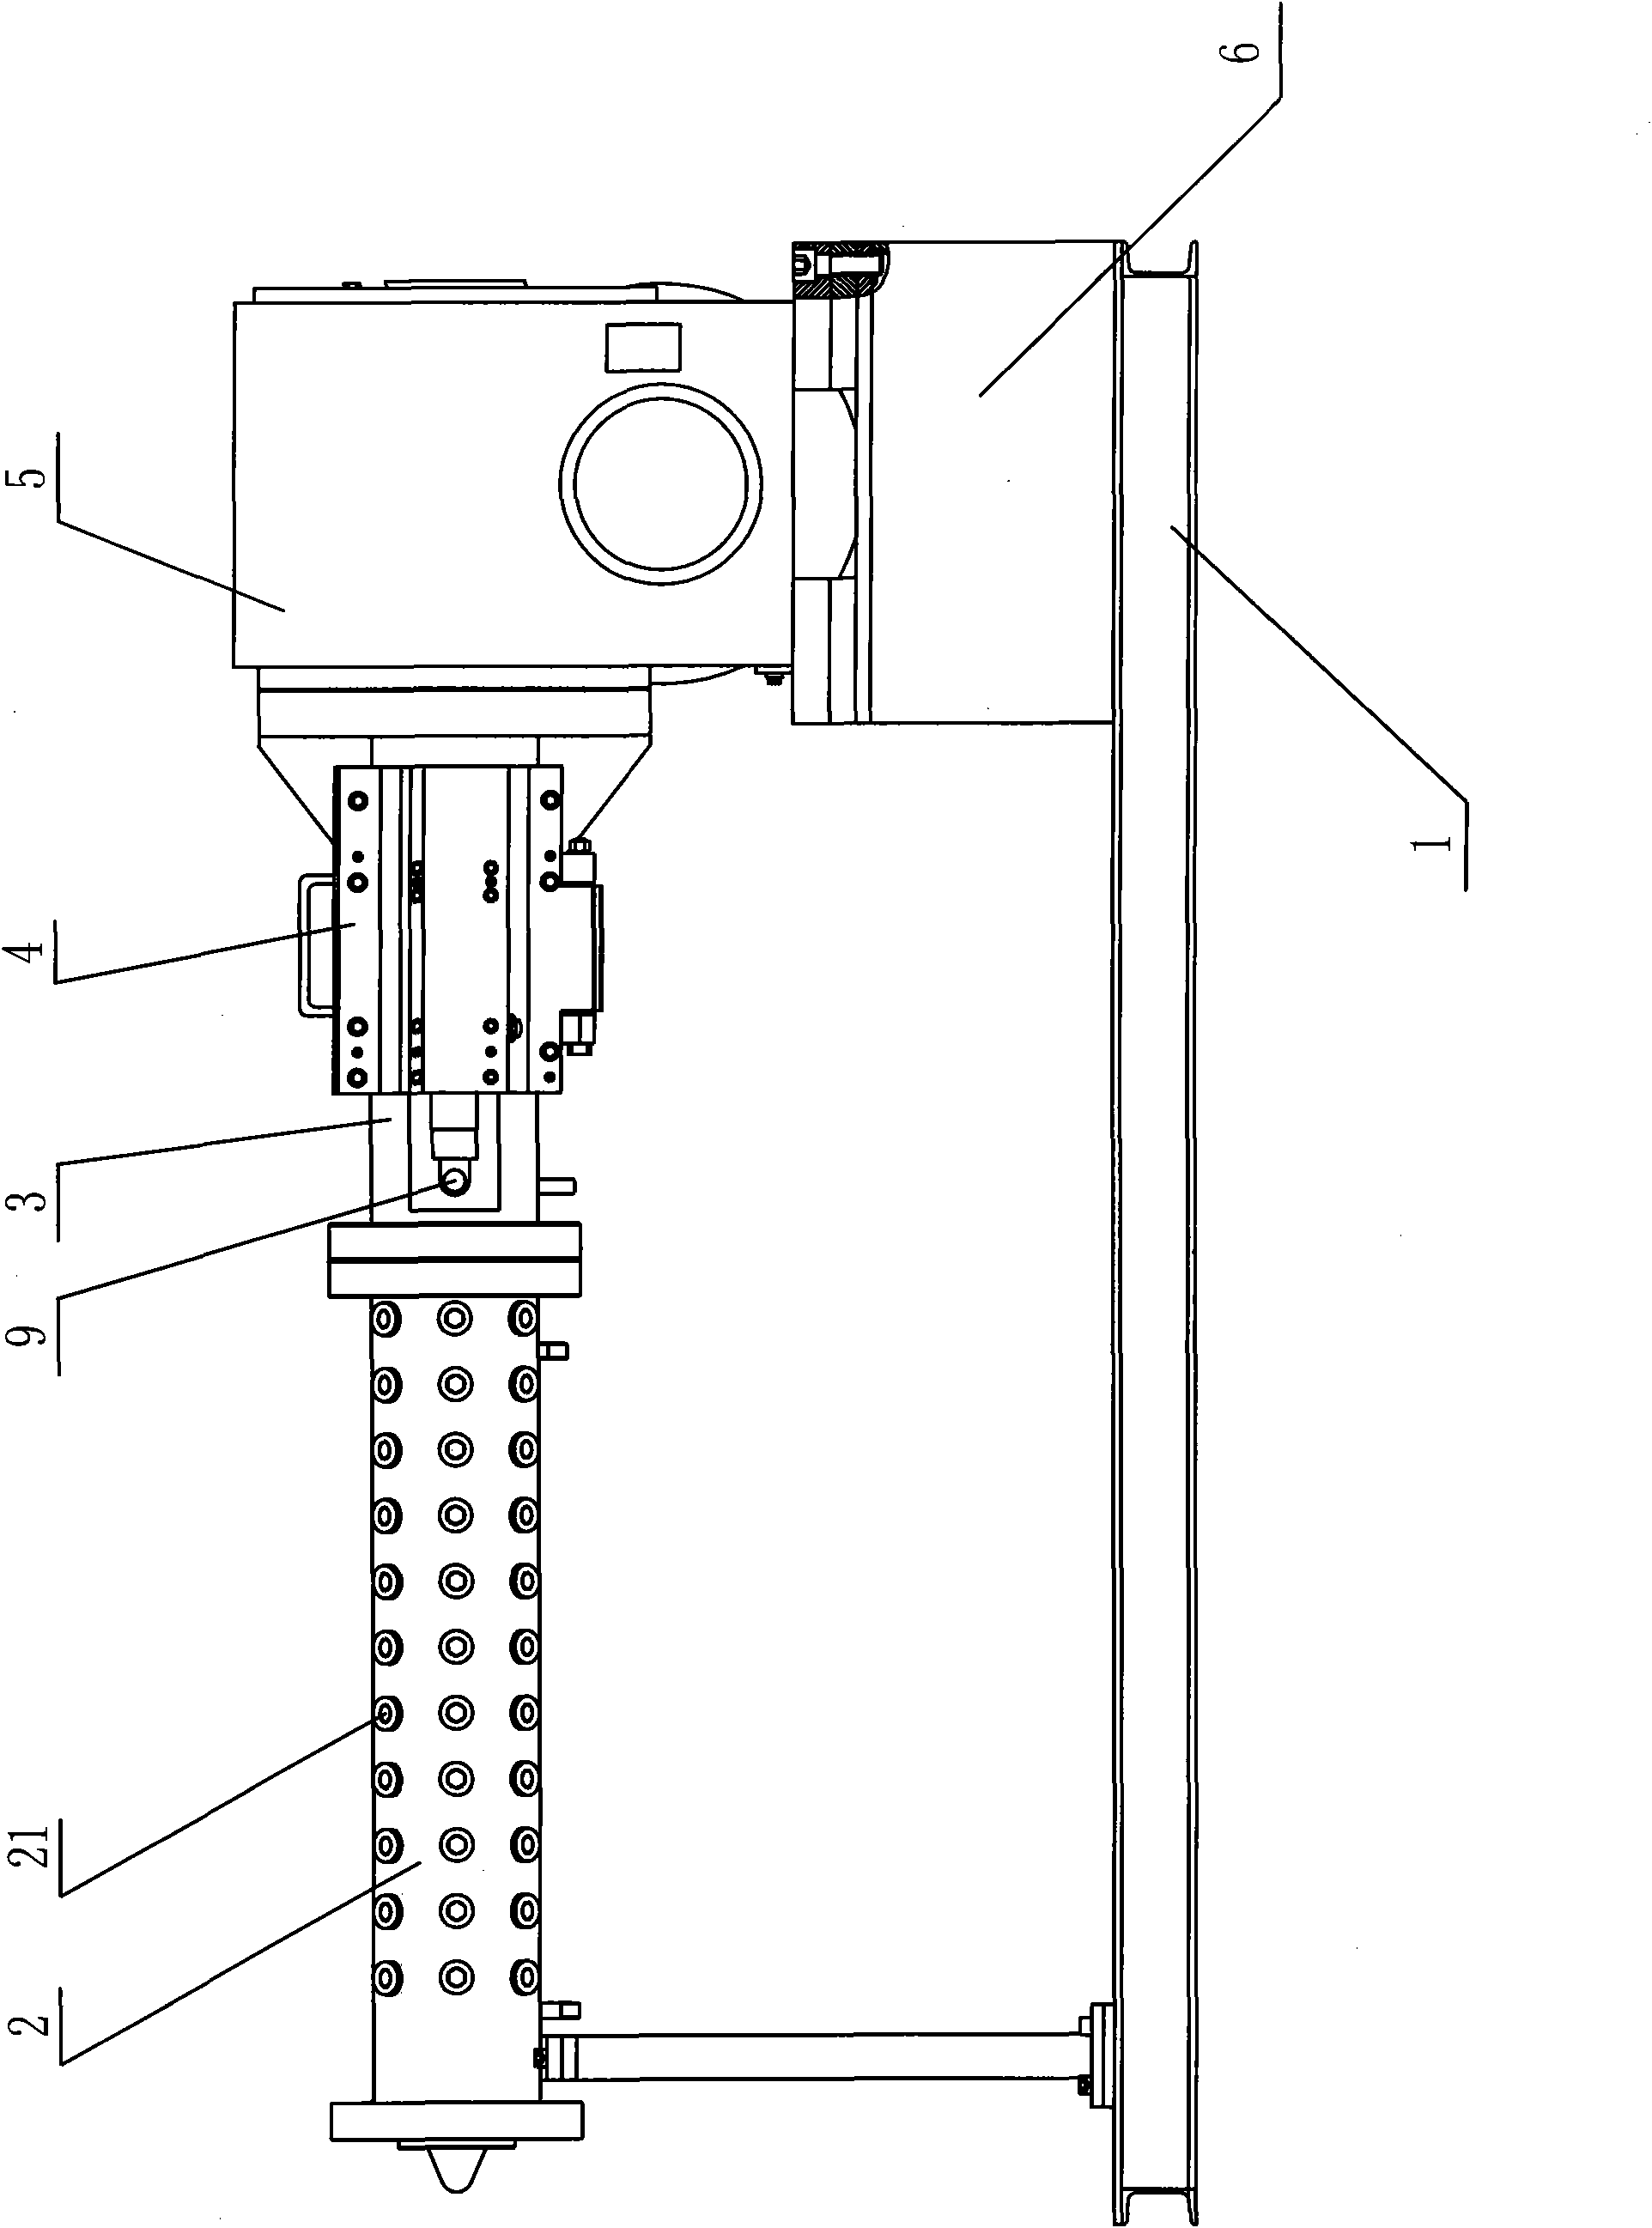 Rubber helical gearing cold feed extruder